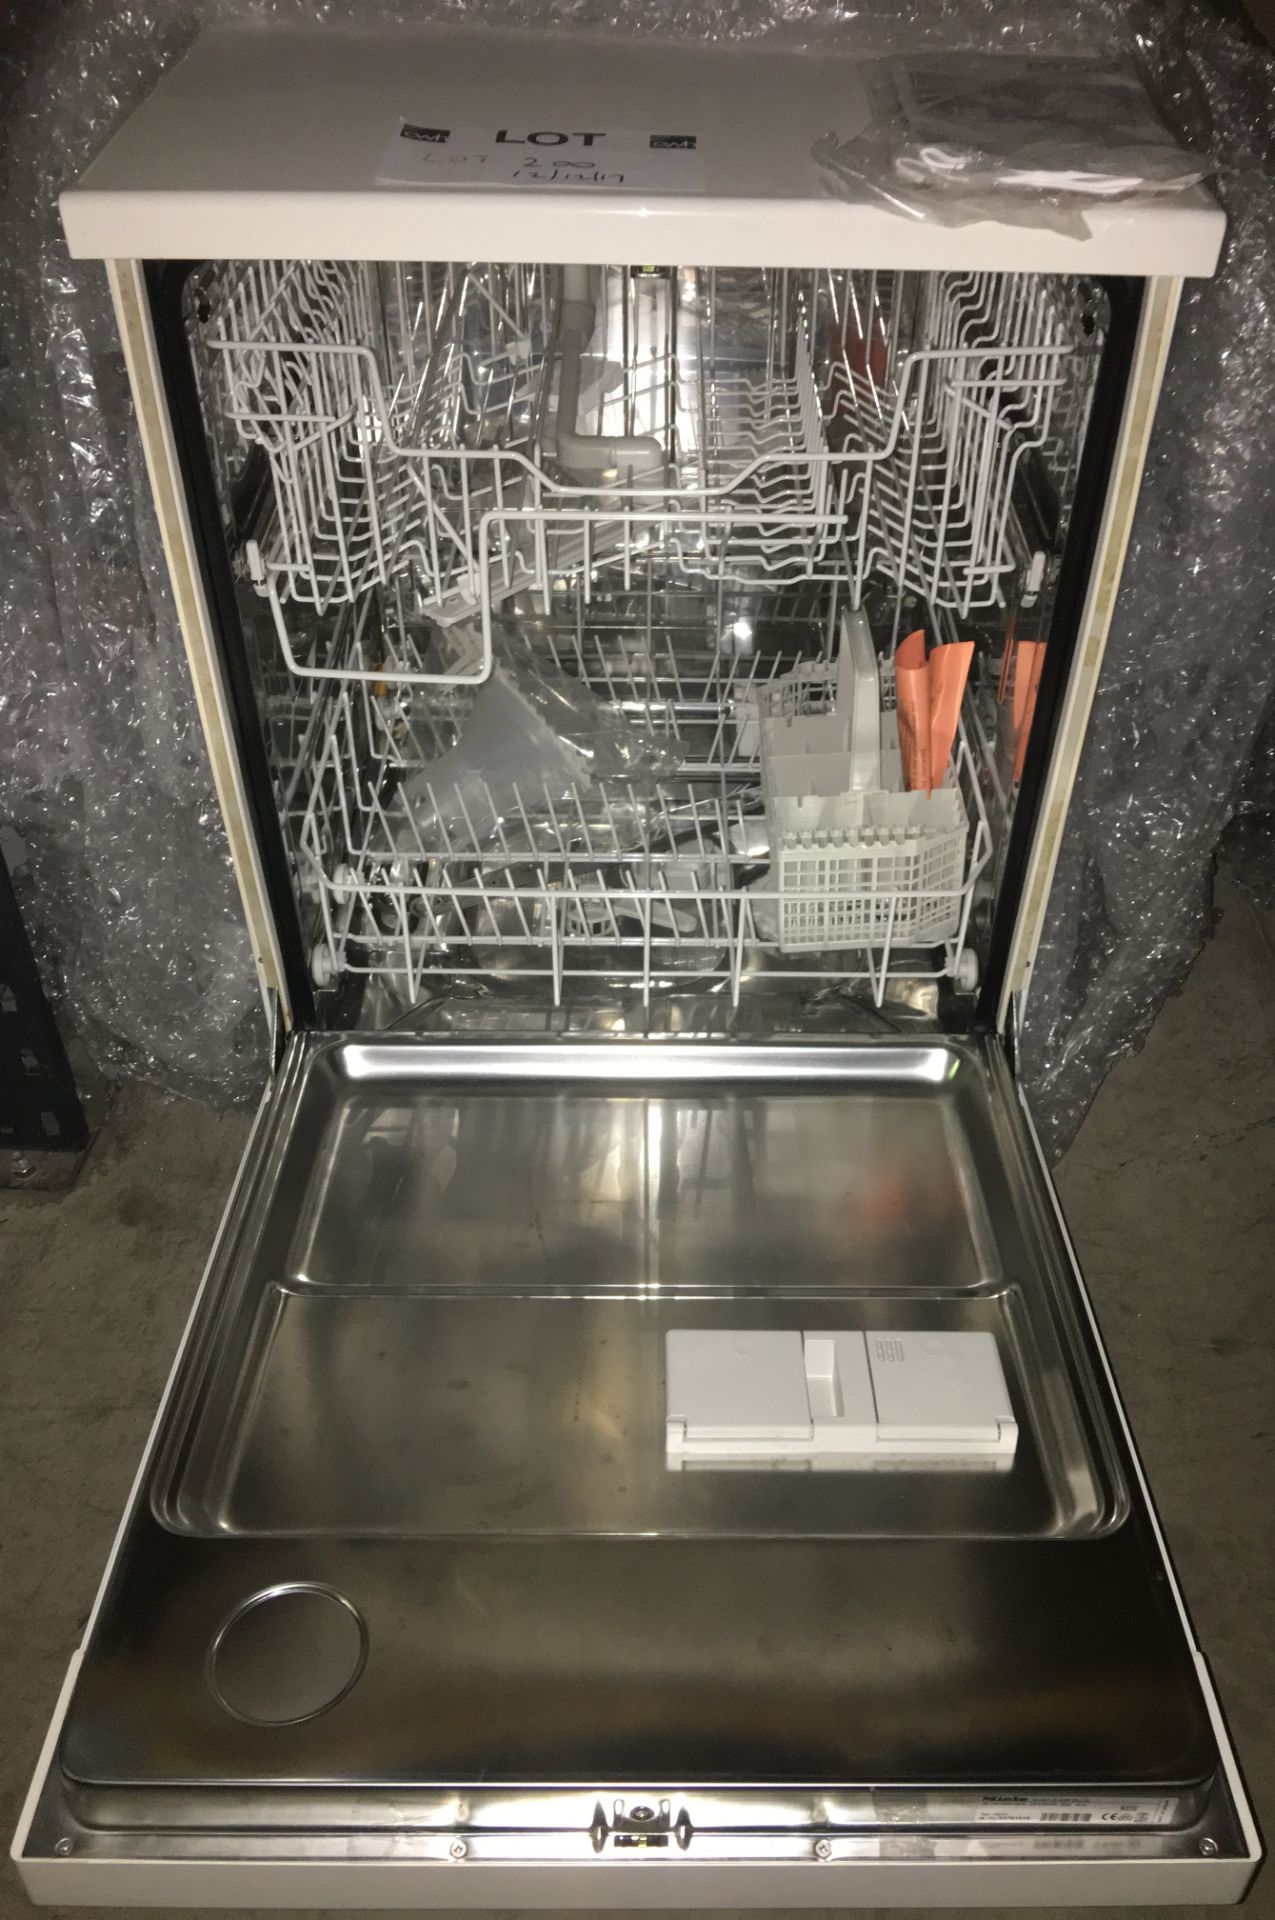 A Miele G638 Plus dishwasher complete with manuals - new & unused. - Image 2 of 3